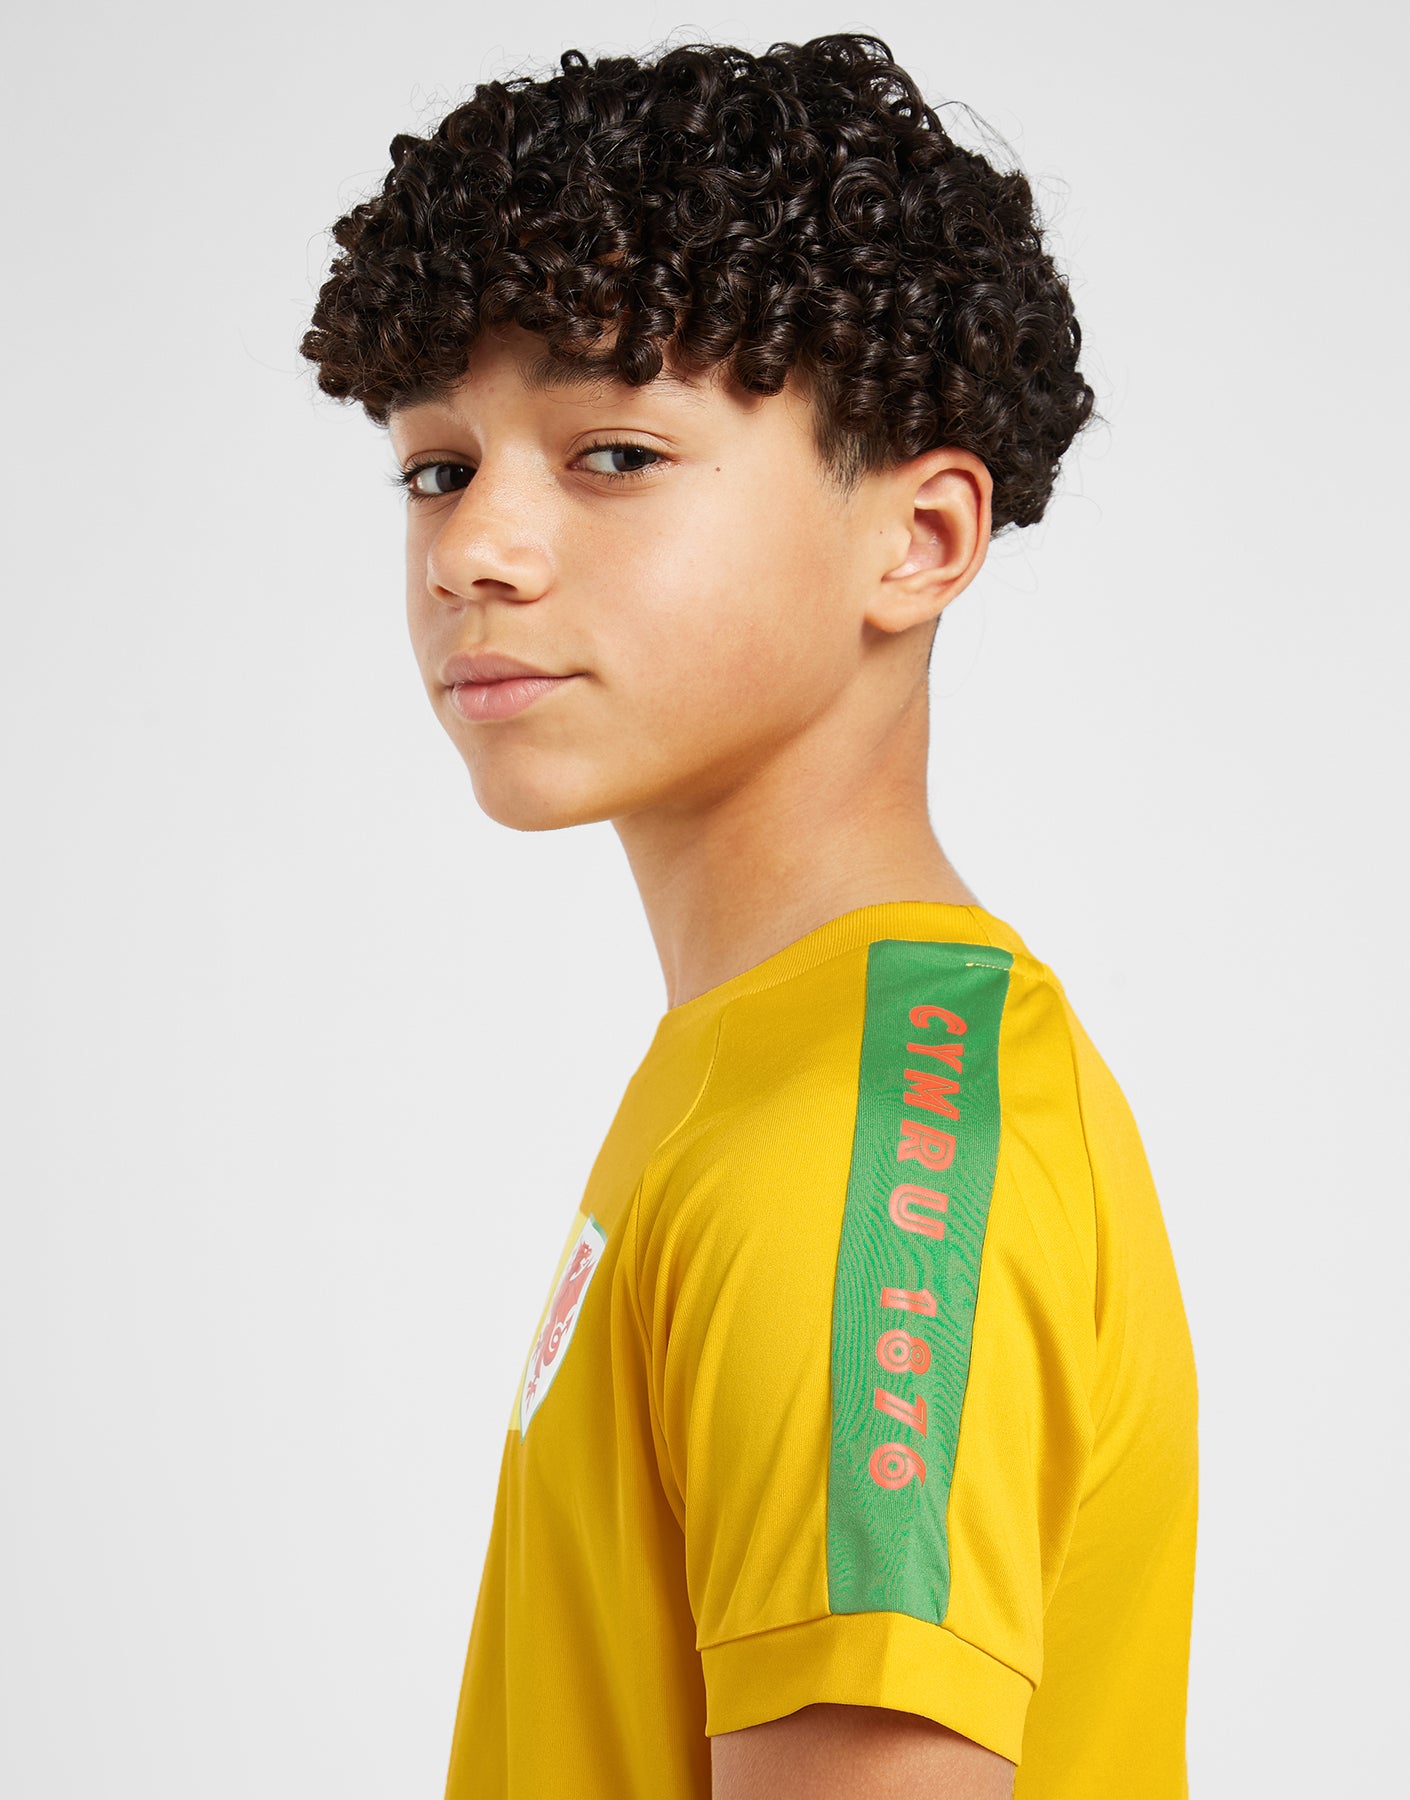 Official Team Wales Kids Sleeve Print T-Shirt - Yellow - The World Football Store